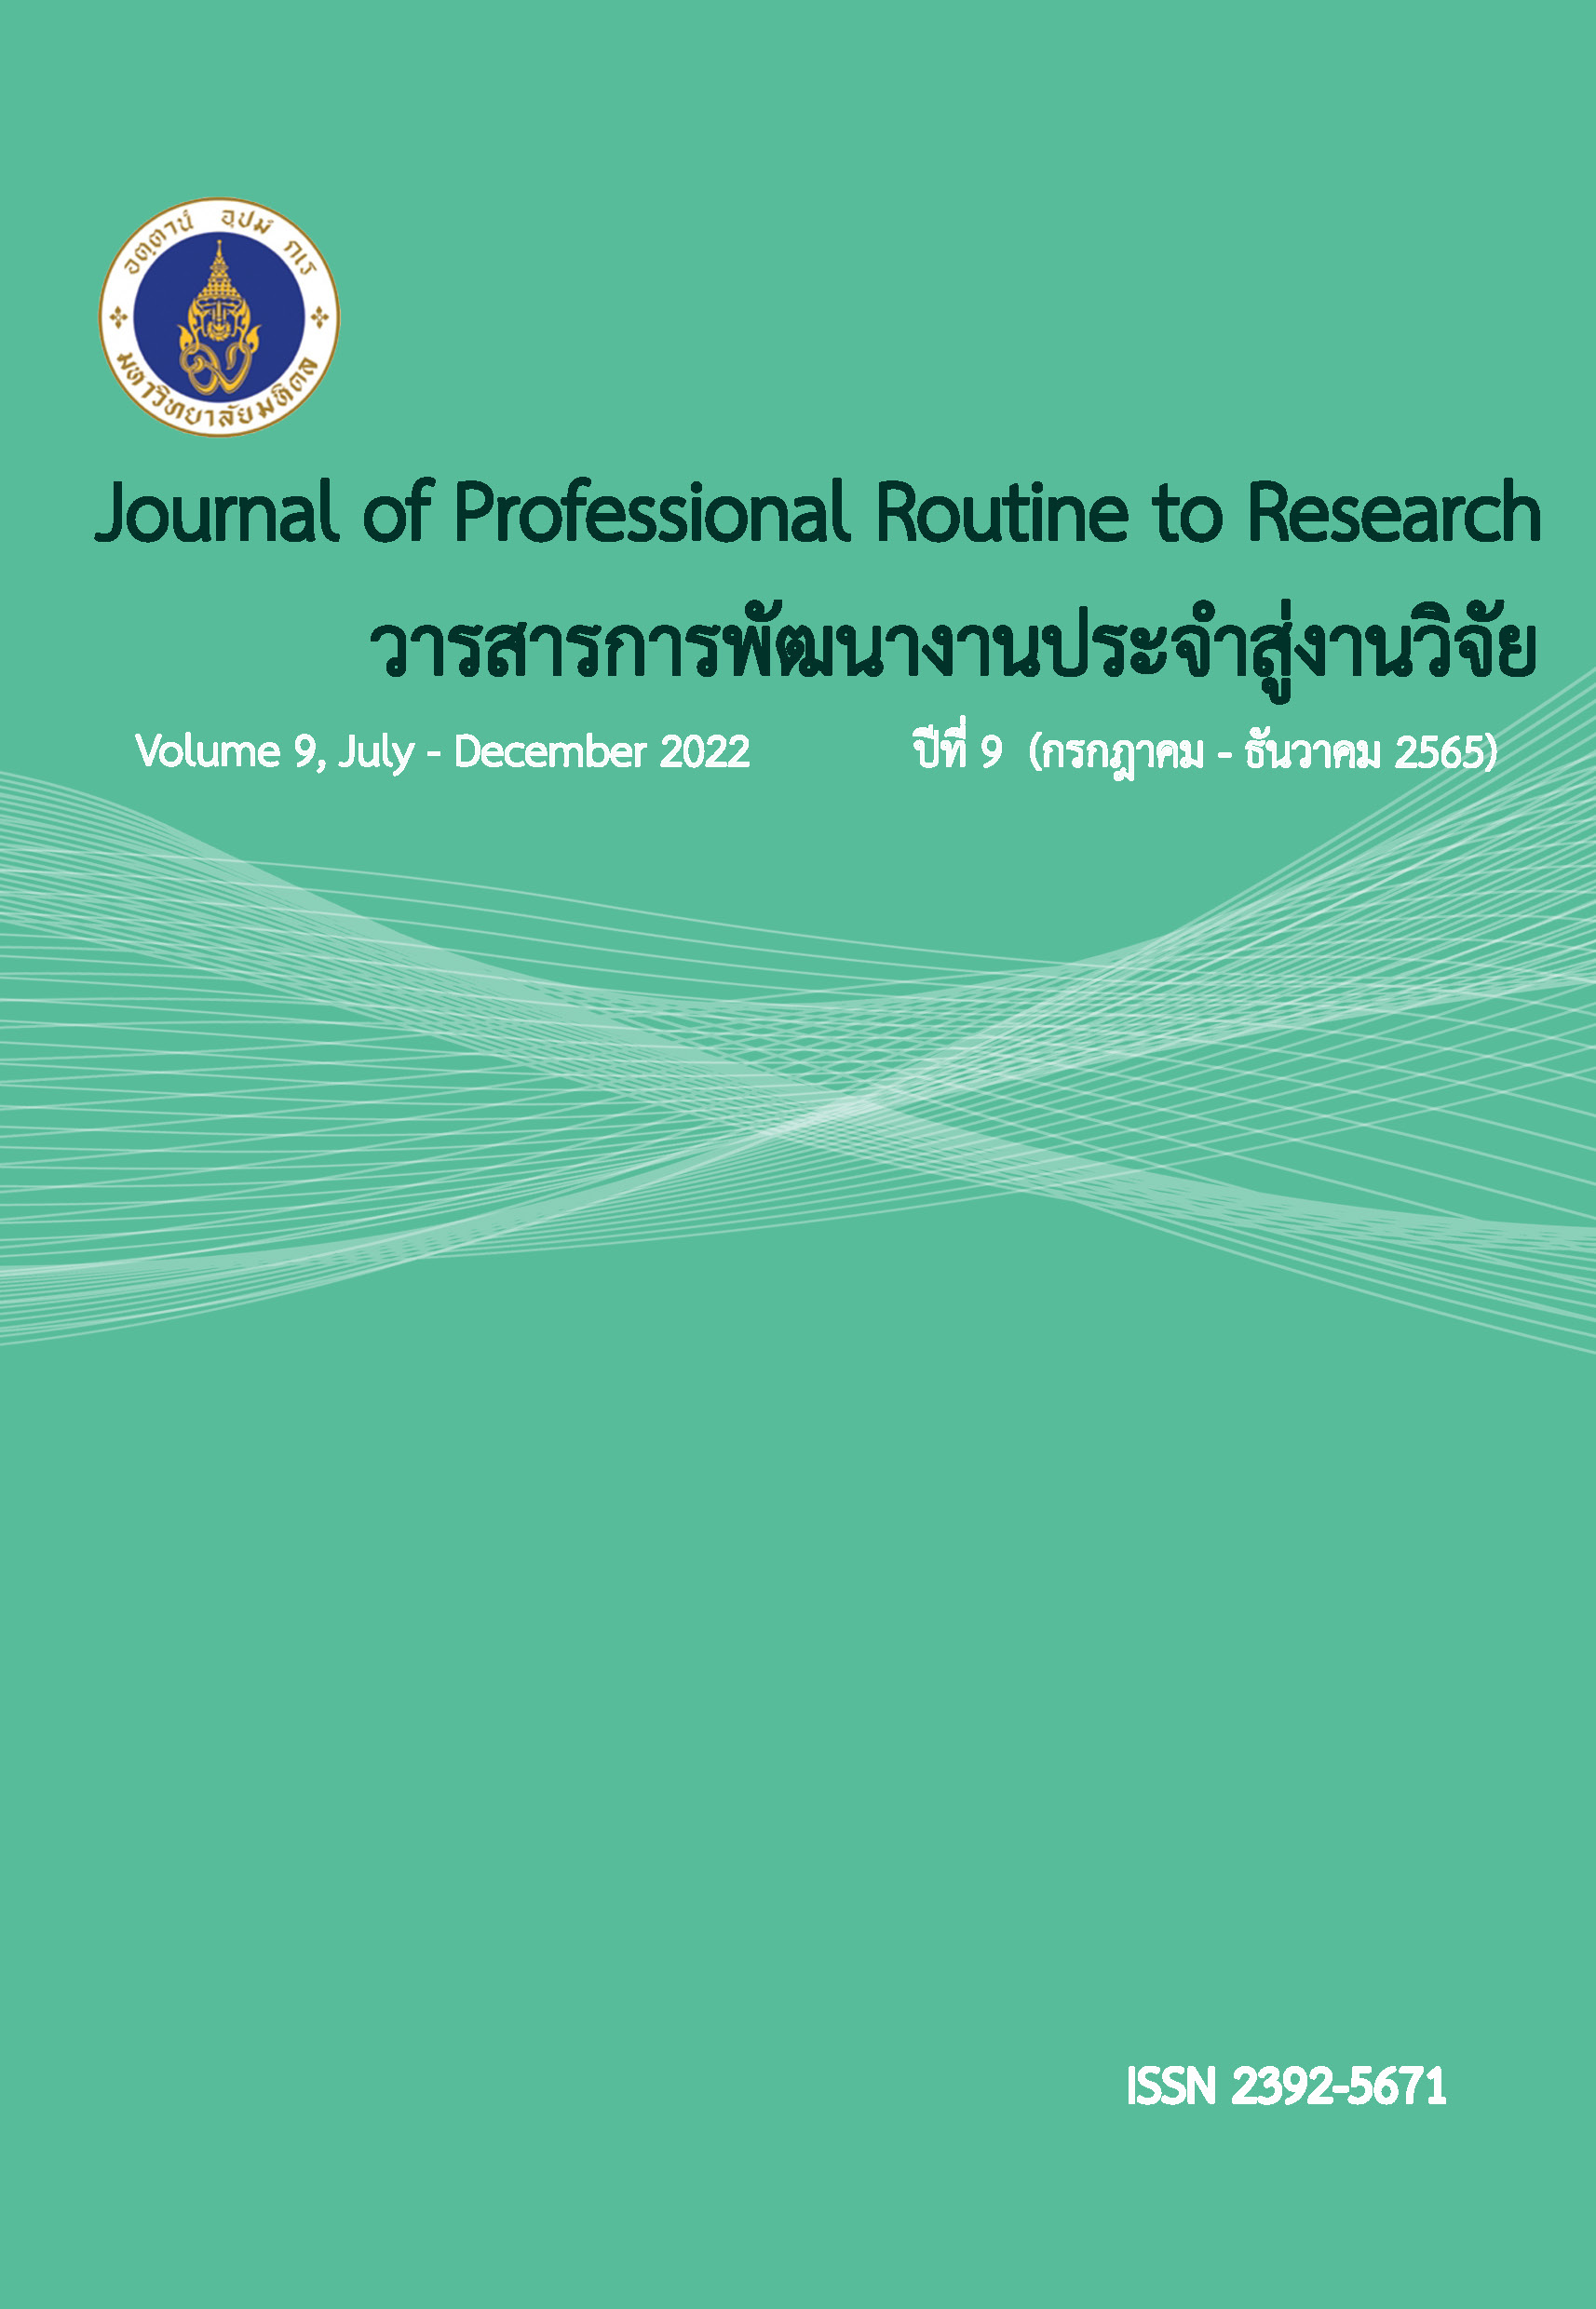 					View Vol. 9 No. 2 (2022): Journal of Professional Routine to Research (JPR2R)
				